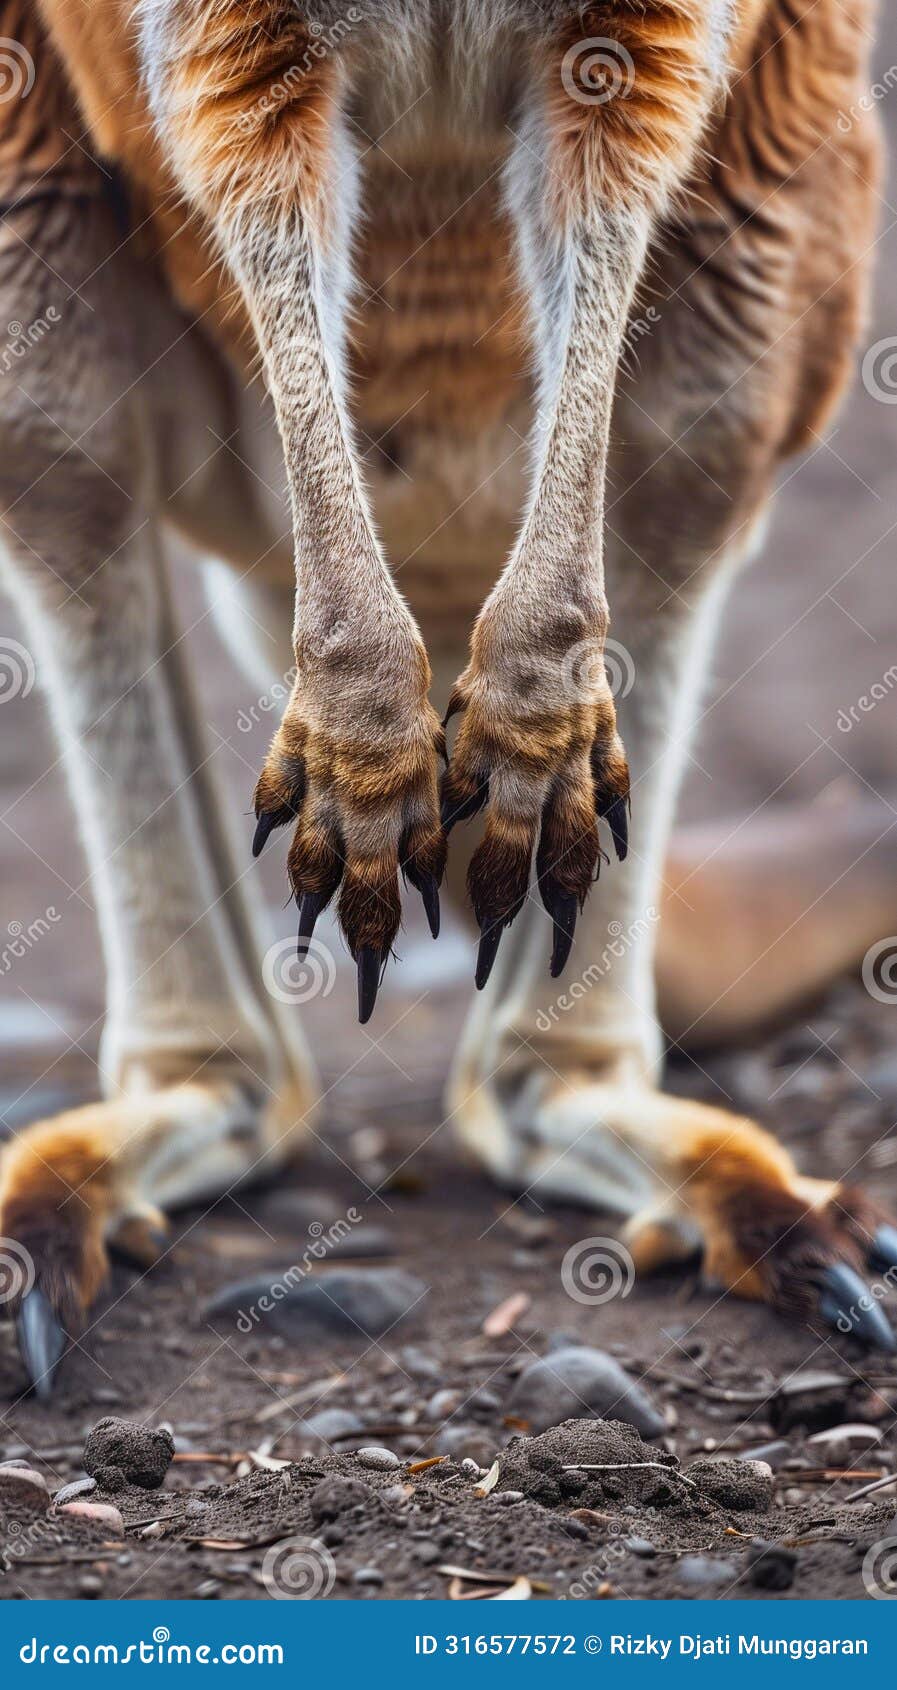 a close-up portrait of a kangaroo's powerful hind legs and feet